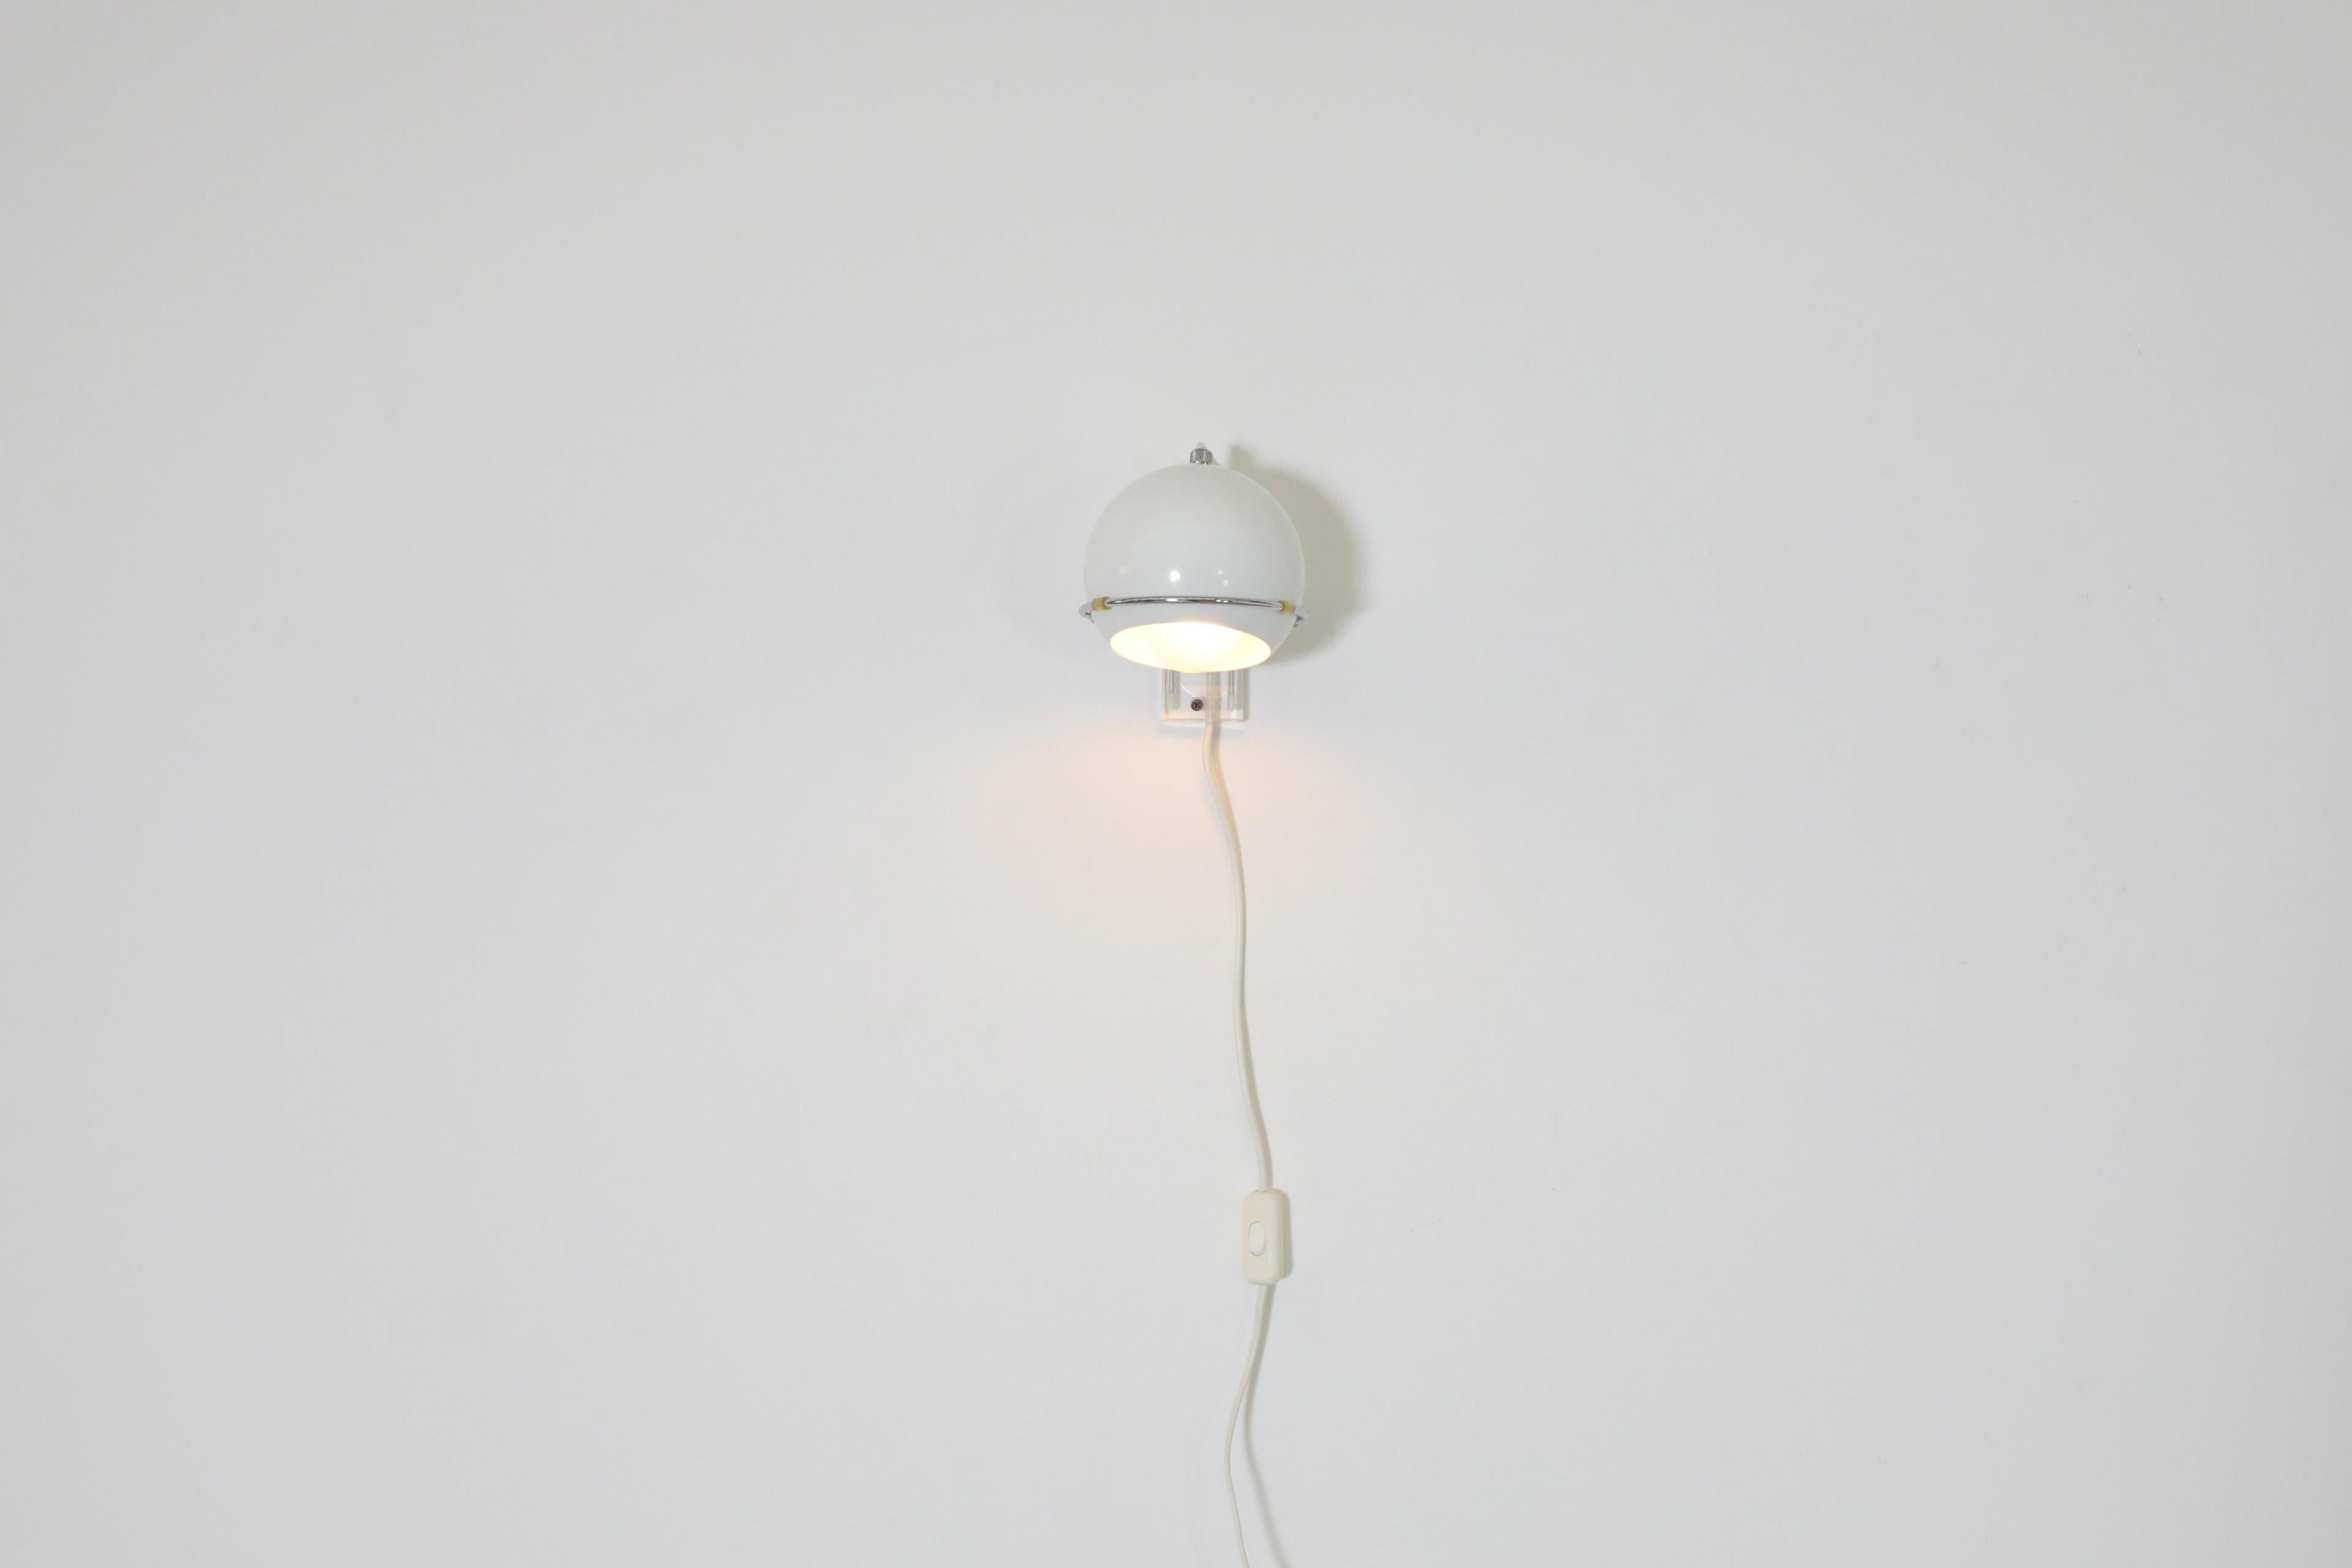 Mid-Century white enameled metal globe spot light sconce with chrome ring holder and plexi back mount by Gepo. This modern styled Dutch spot lamp is multi-directional and ideal in a fun and energetic office or bedroom space. In original condition